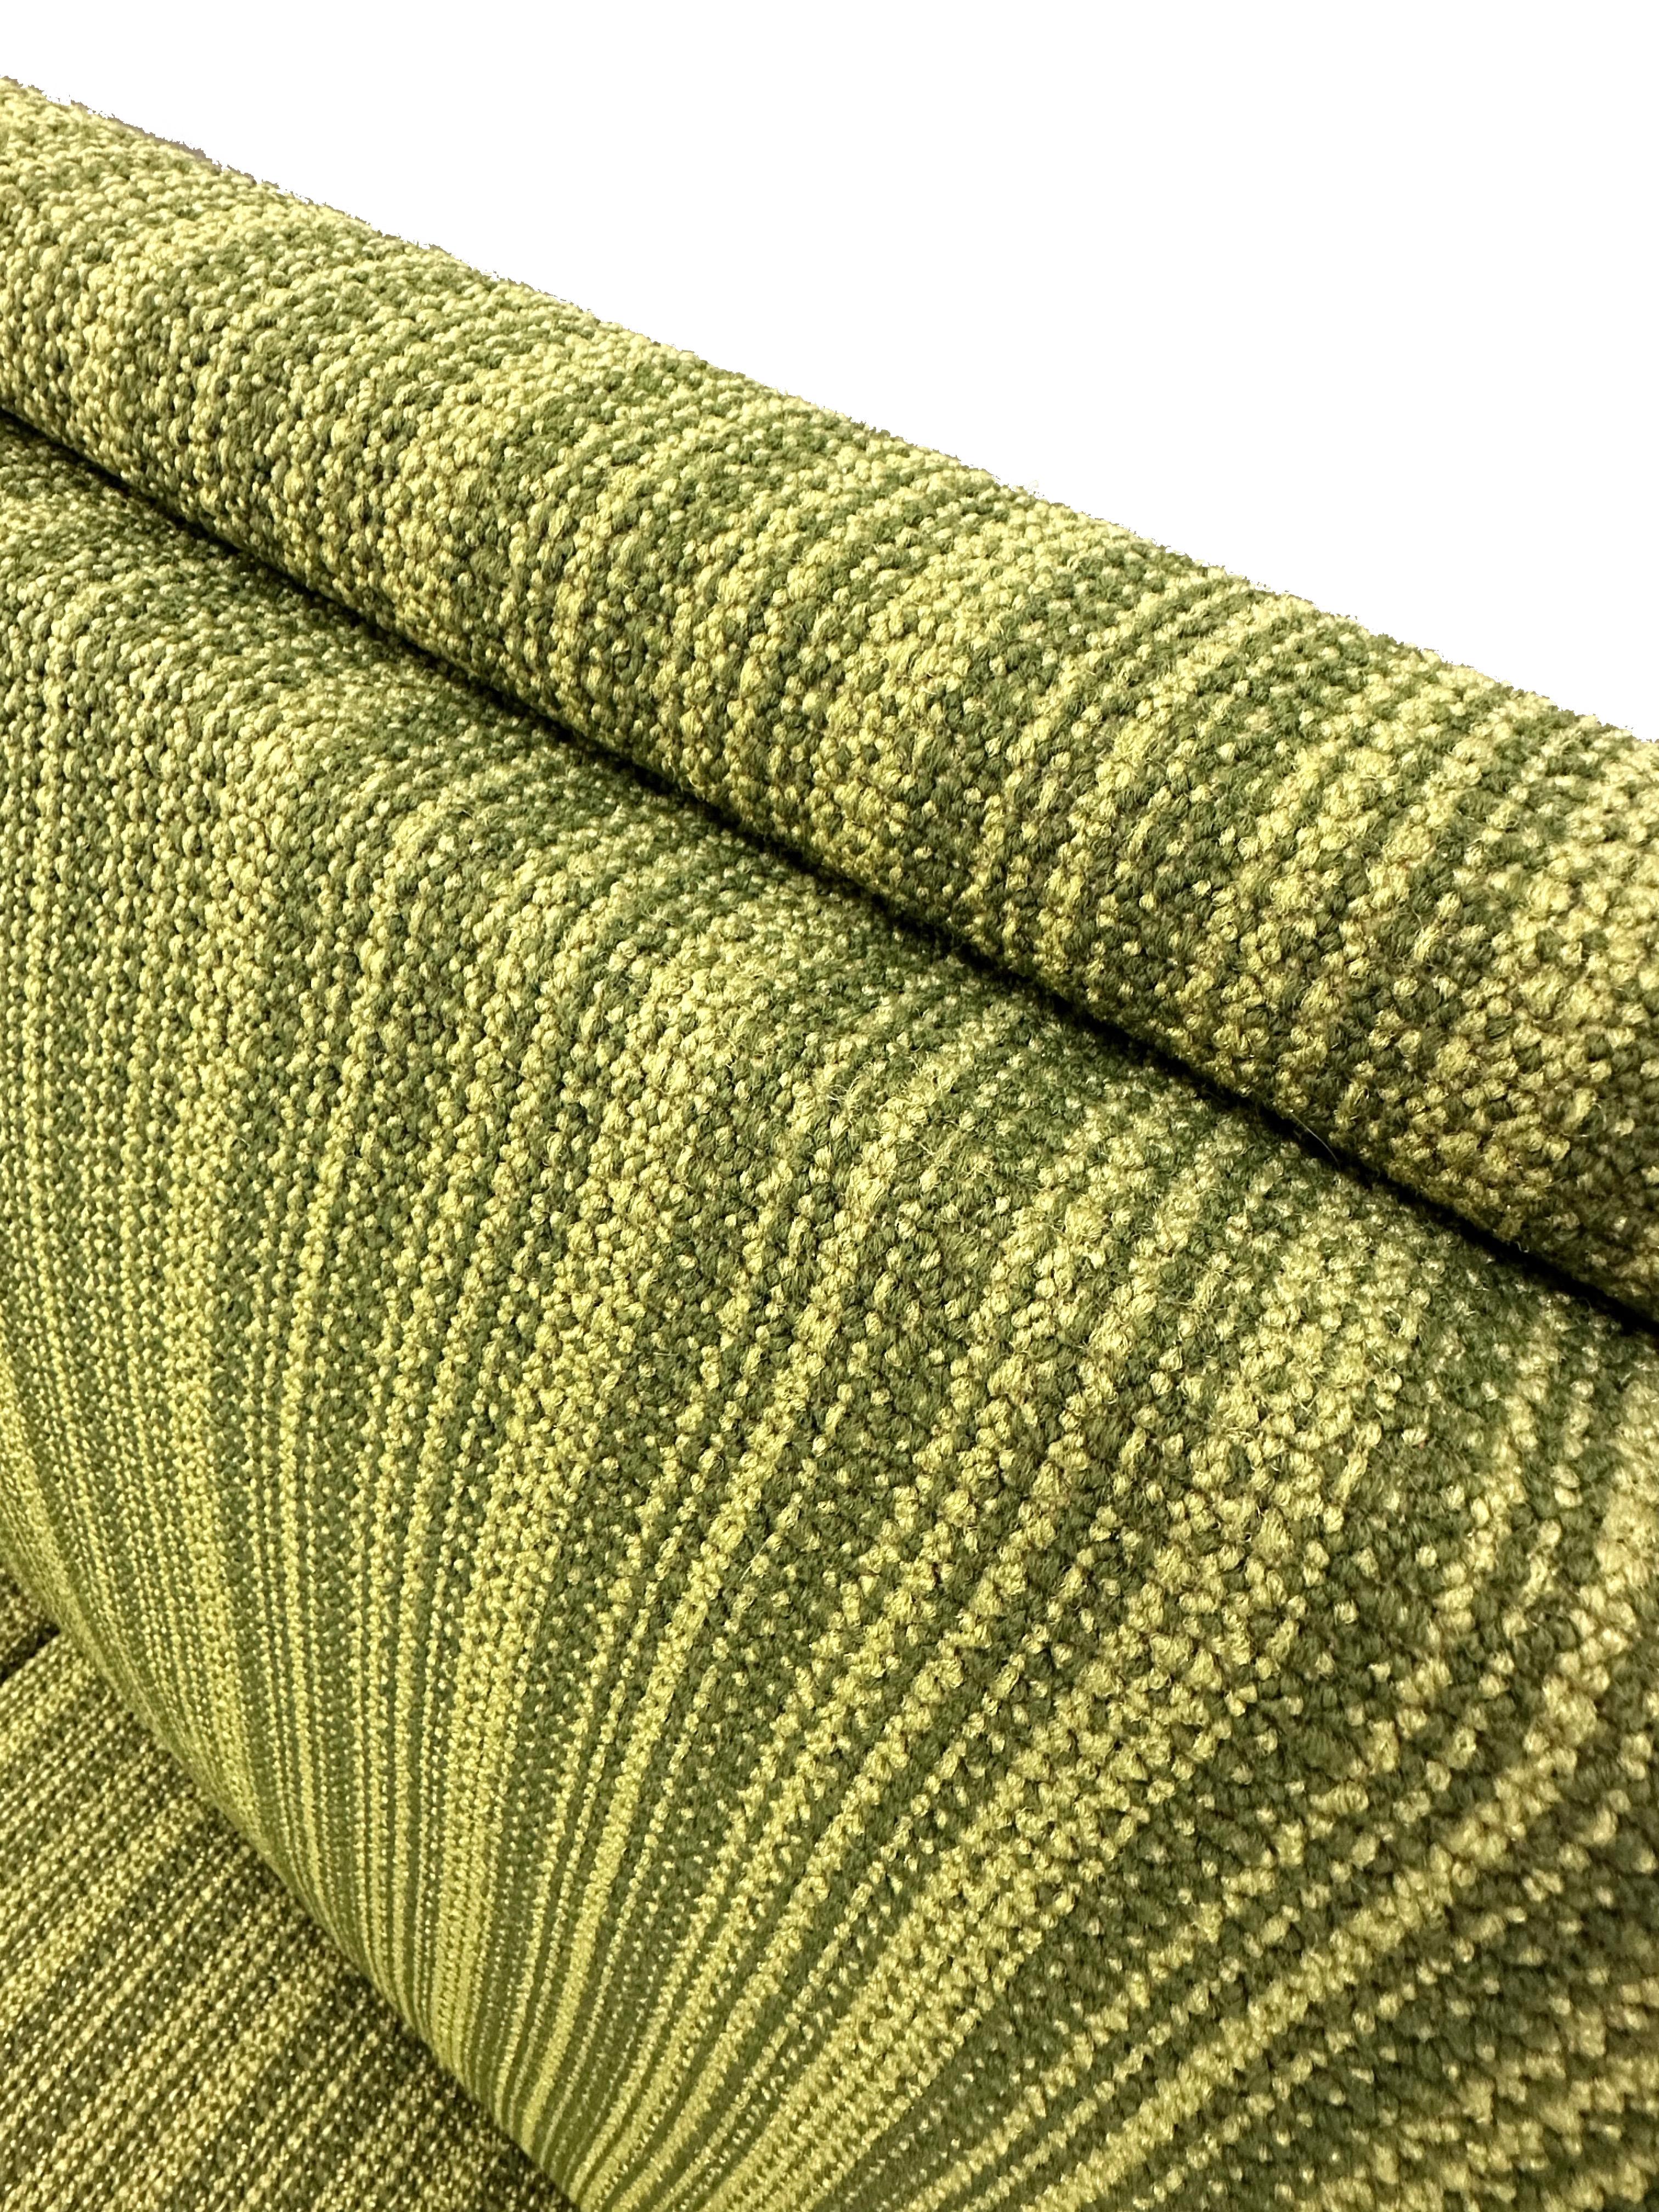 Woven Ikea Sofa by Bengt Ruda, Early 1960s For Sale